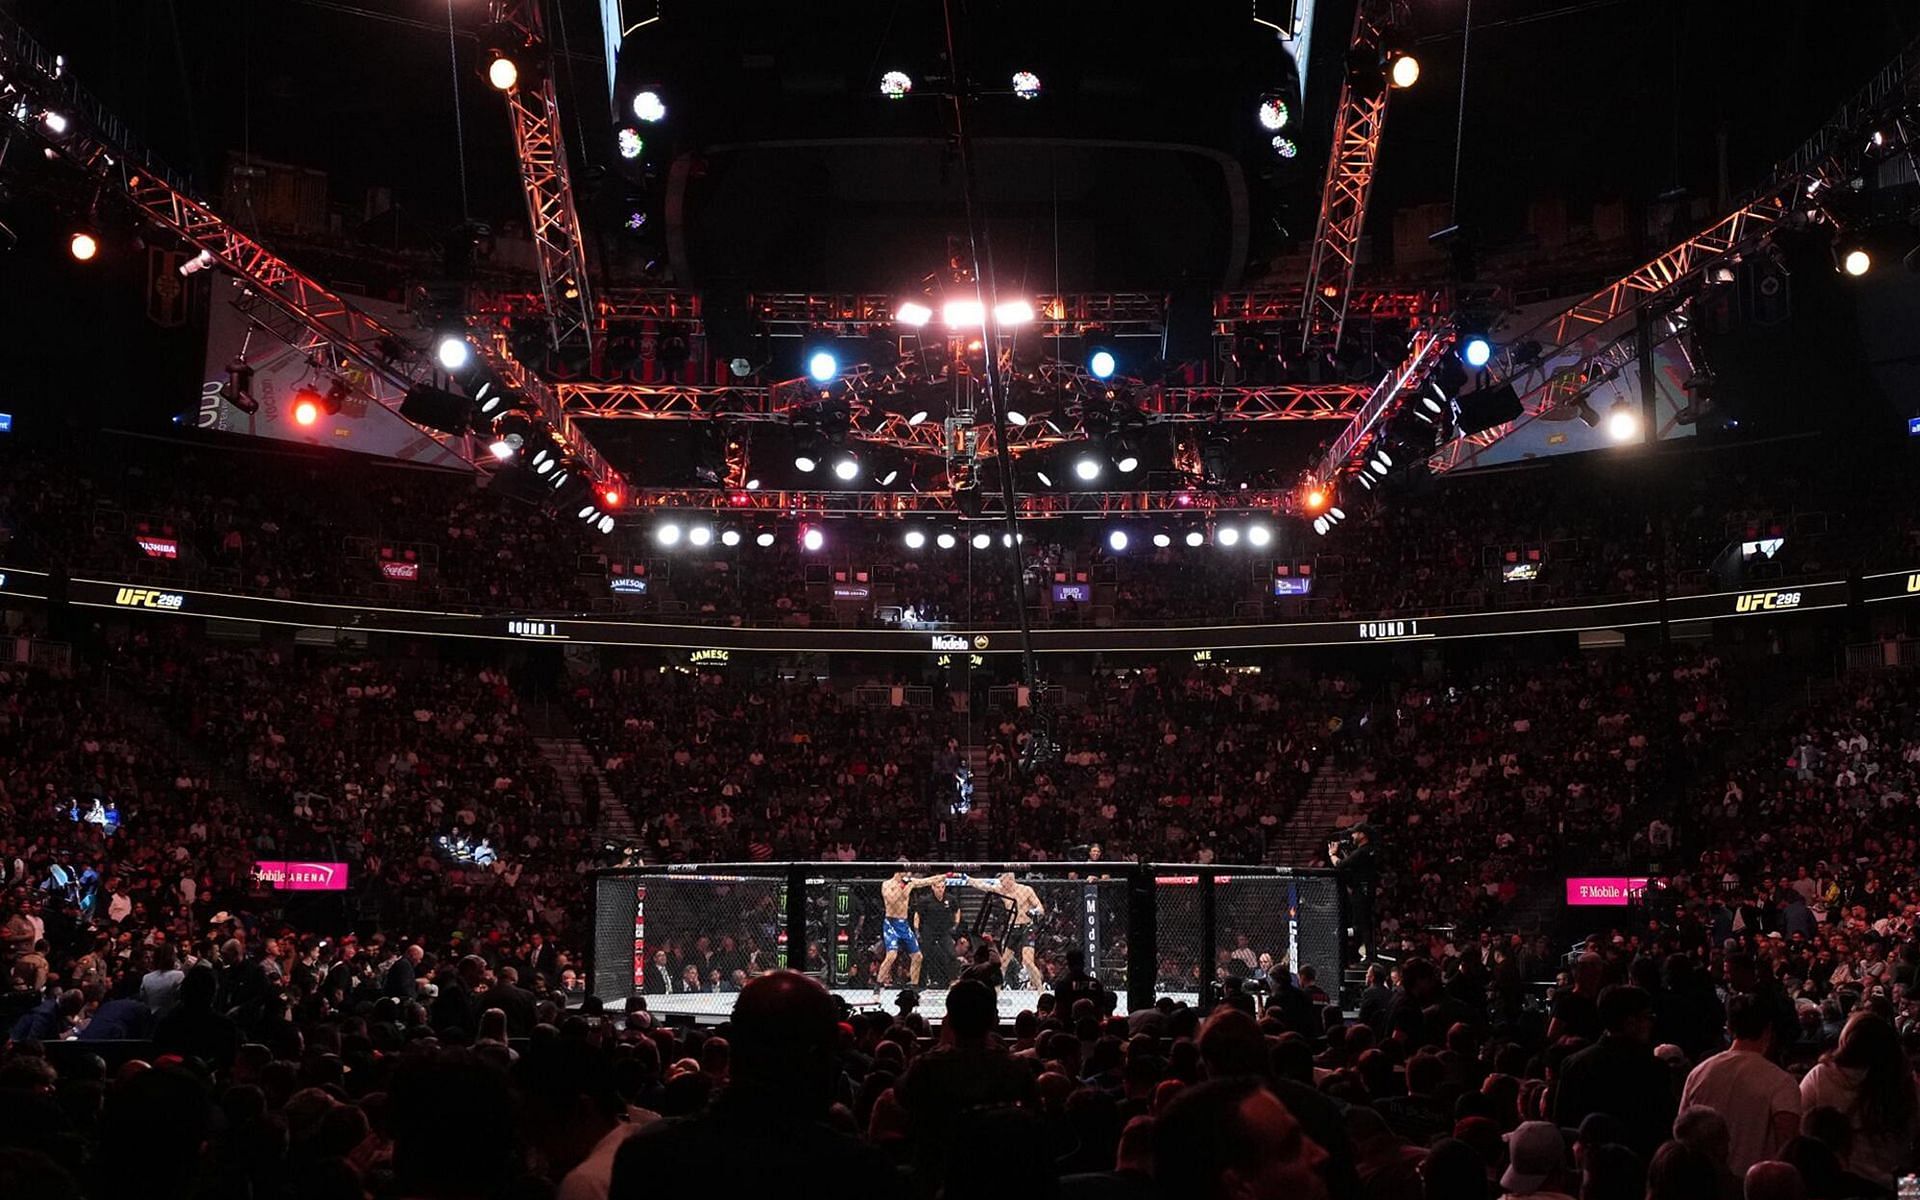 The UFC will have a busy schedule after a month-long break (Image Courtesy: ufc.com)